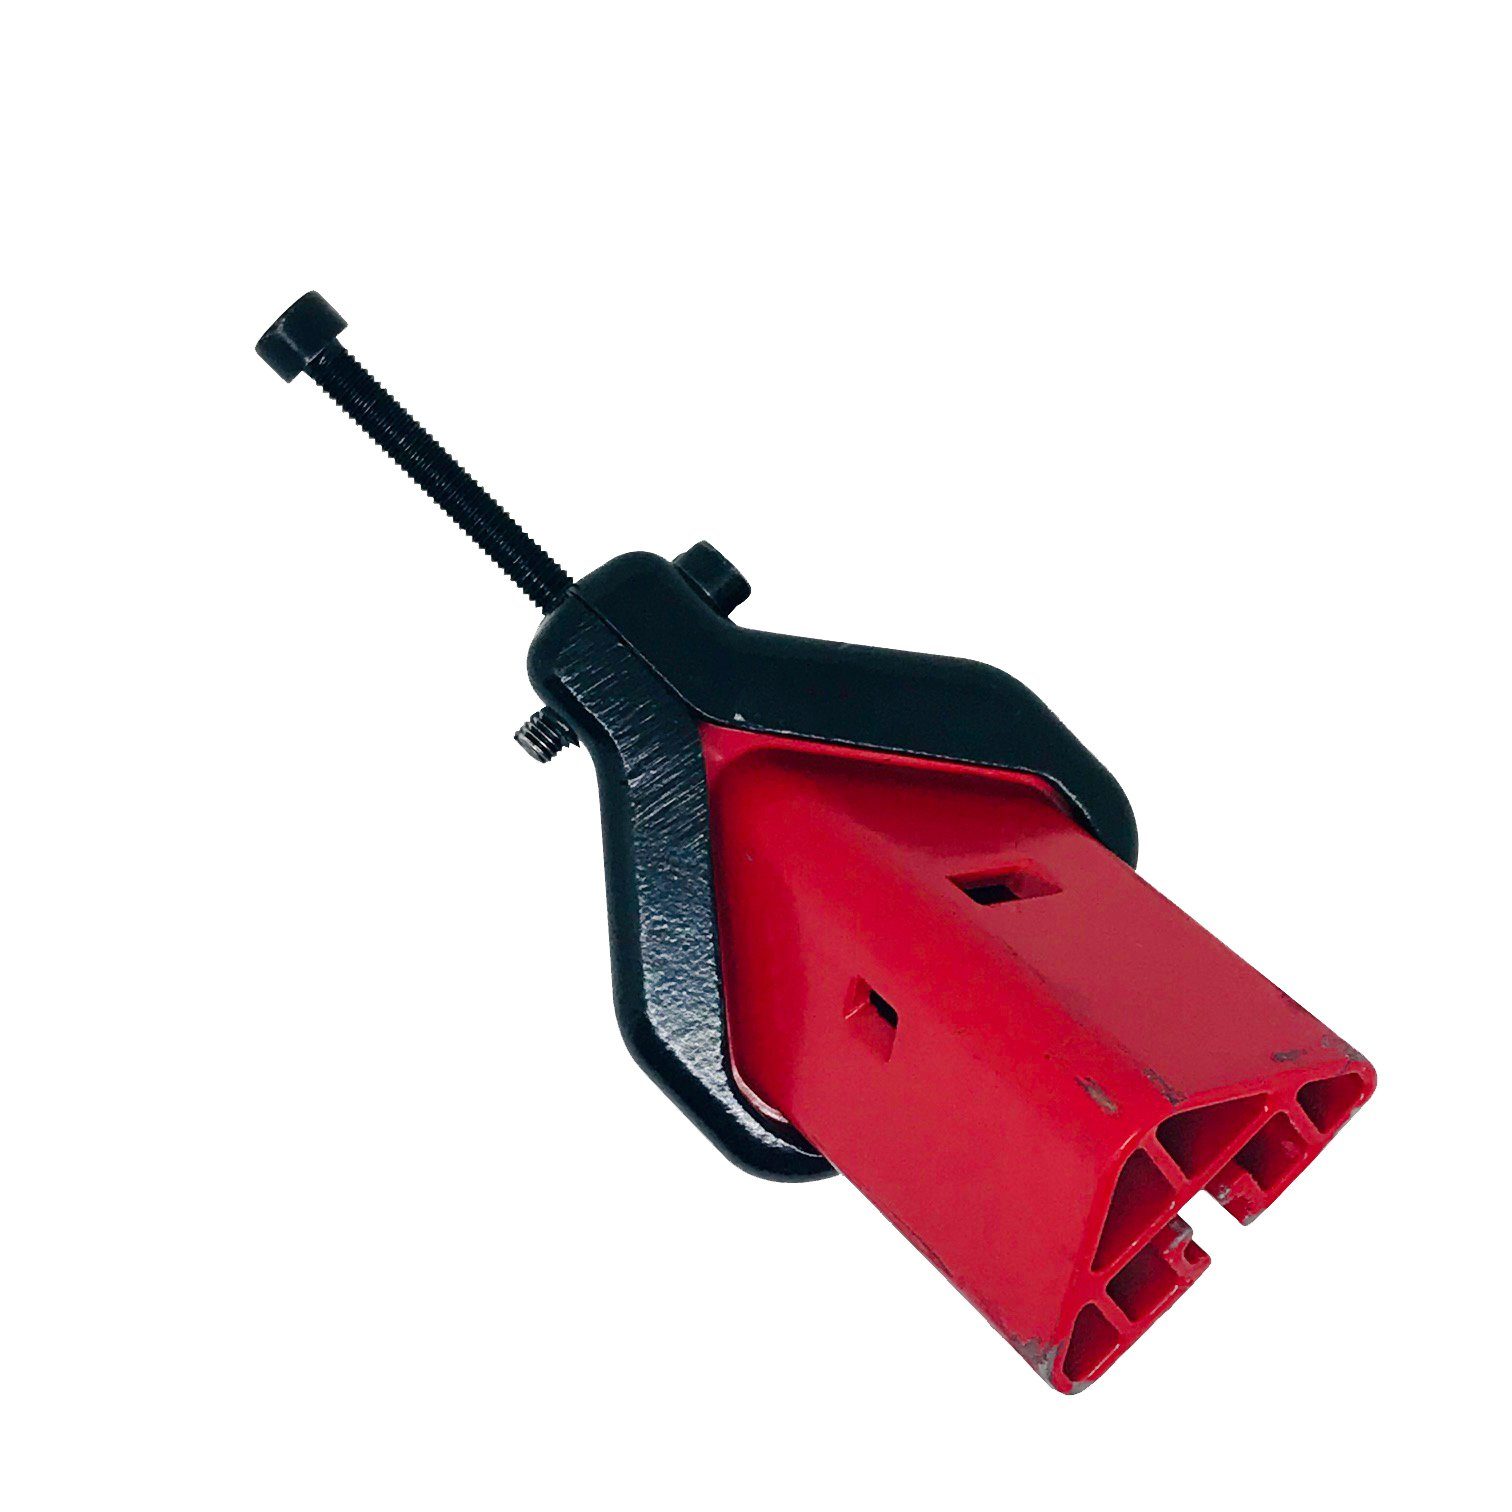 RENTAL: Tool Set to Remove Knee Bar Red Connector from Segway miniPRO and Ninebot S-MAX